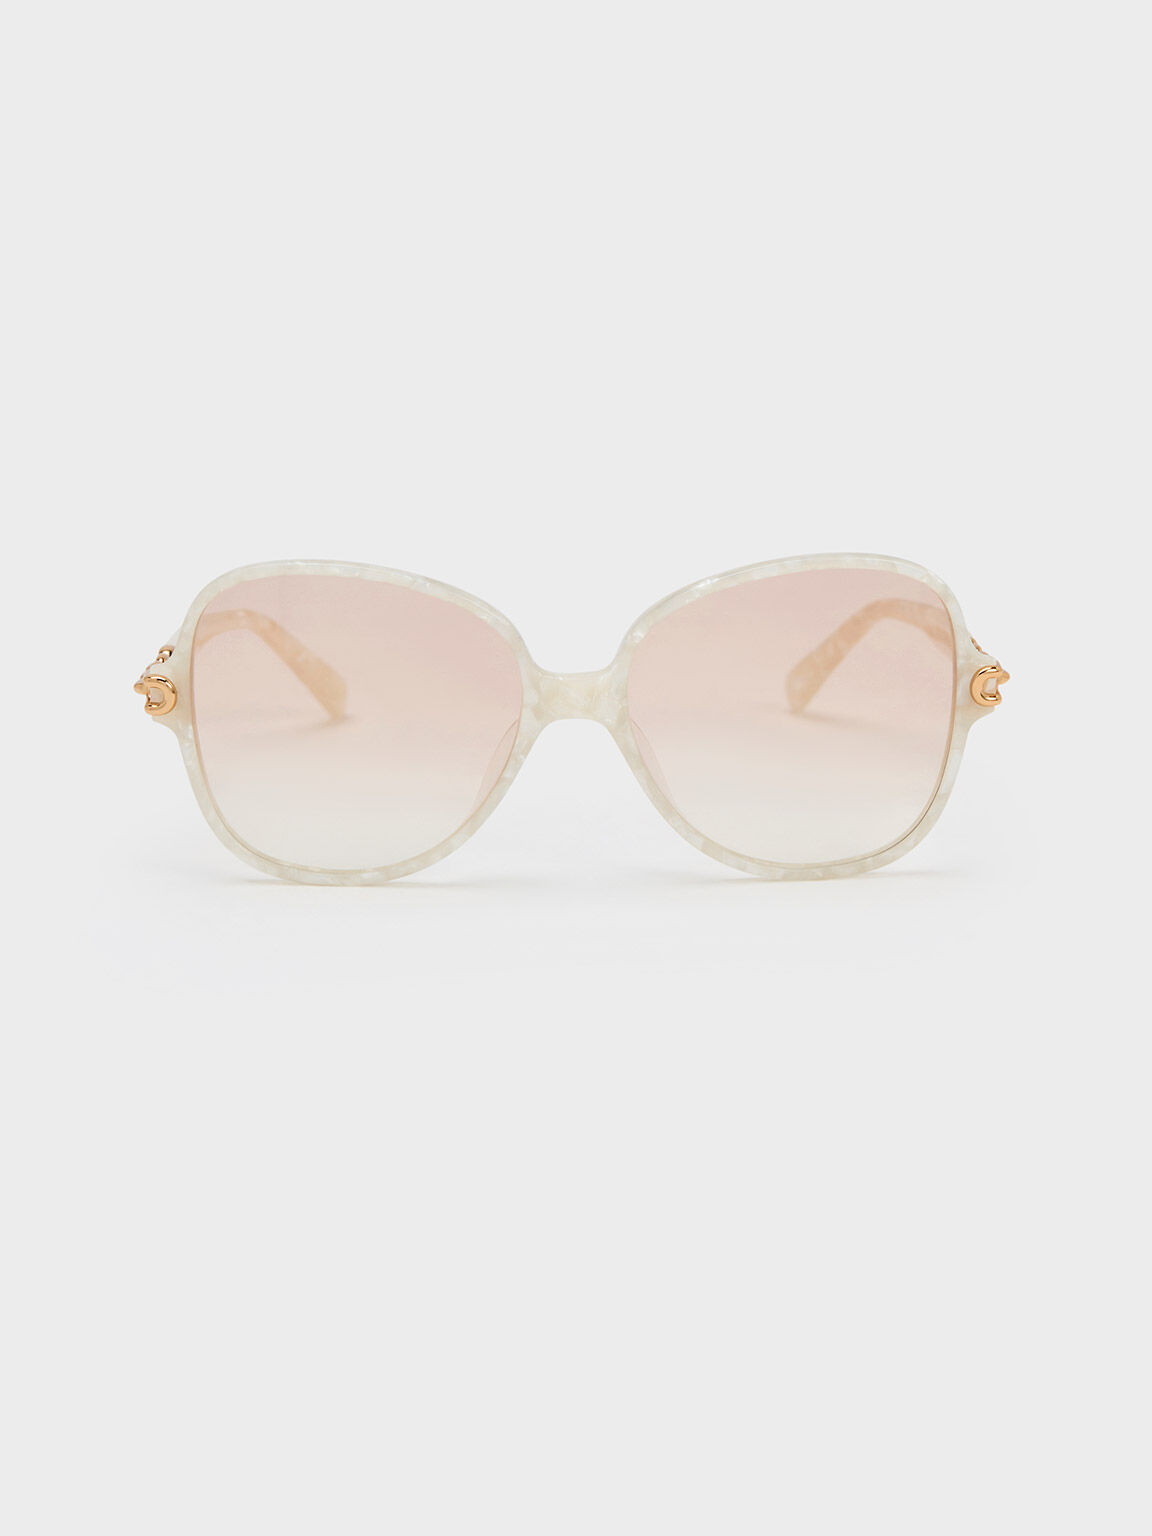 Women's Sunglasses | Exclusives Styles | CHARLES & KEITH US